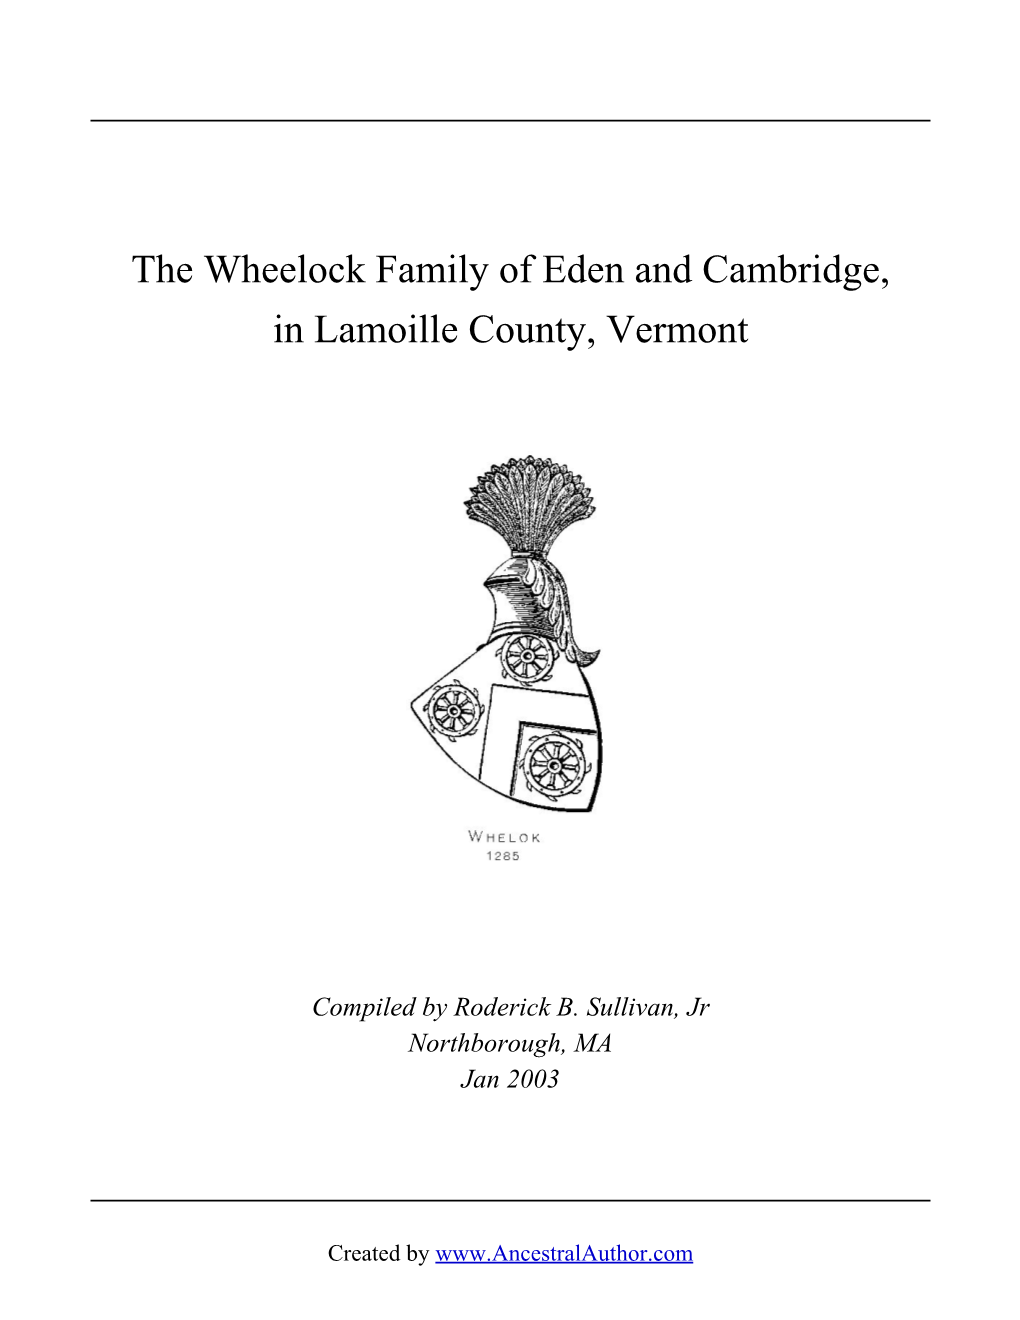 The Wheelock Family of Eden and Cambridge, in Lamoille County, Vermont